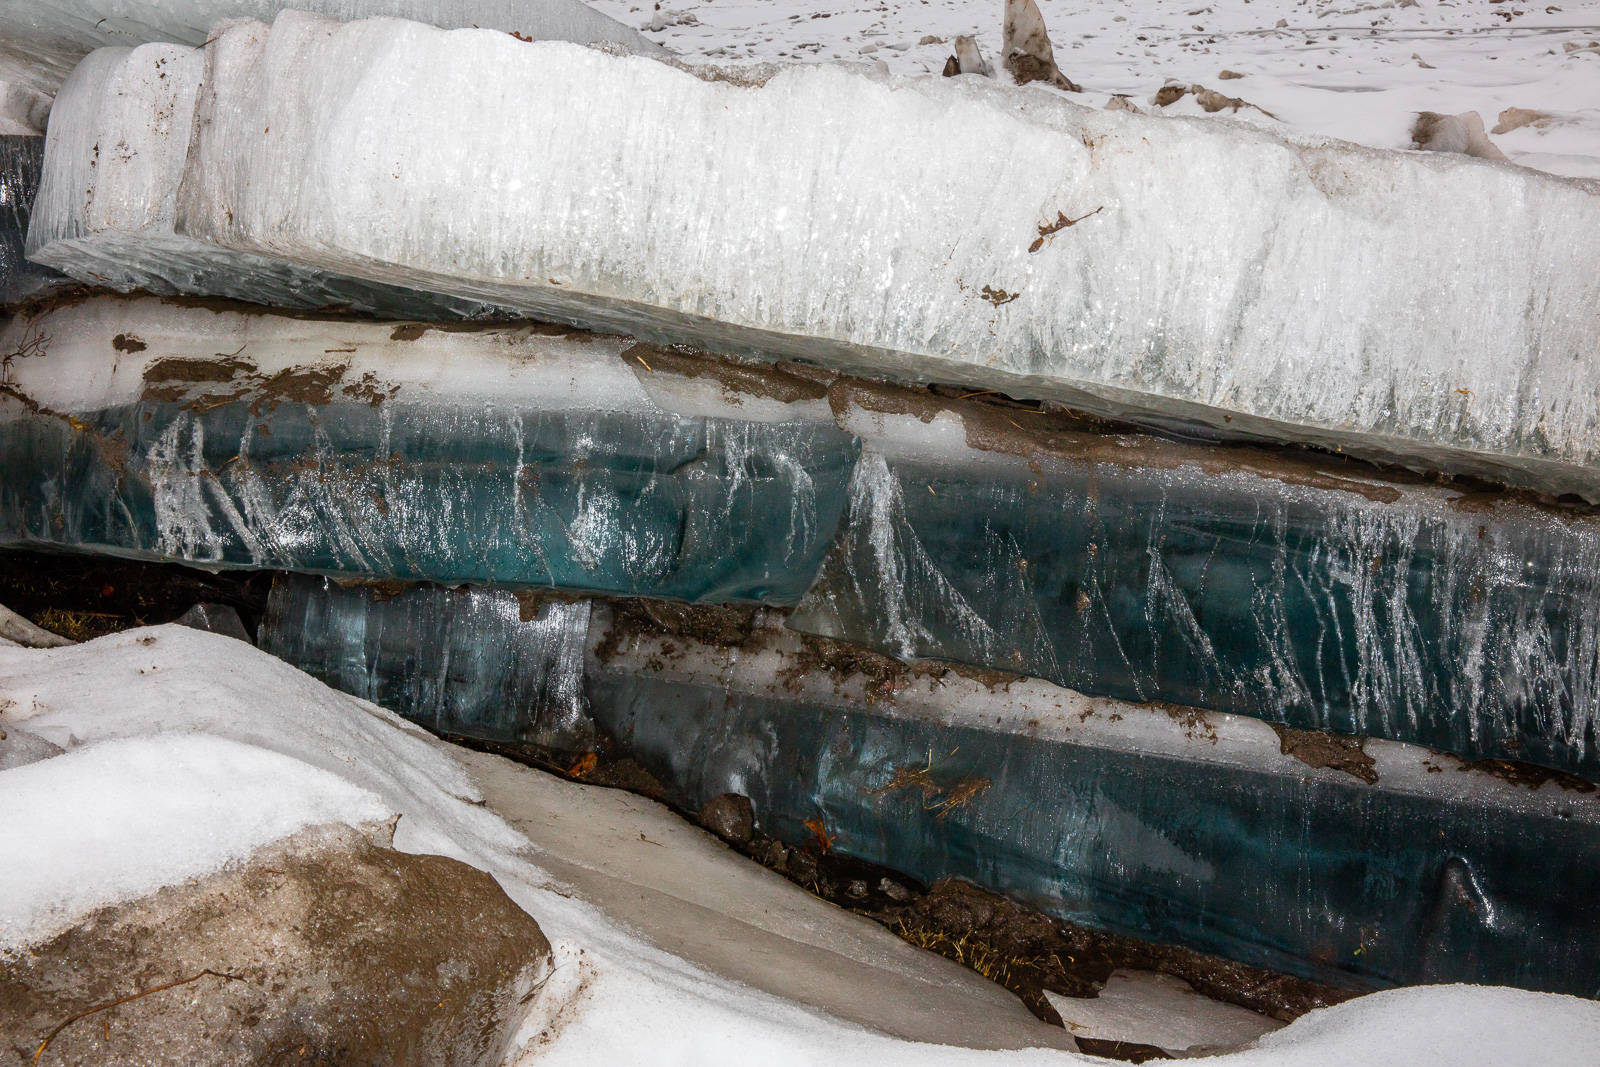 Fluctuating temperatures are causing massive river ice jams